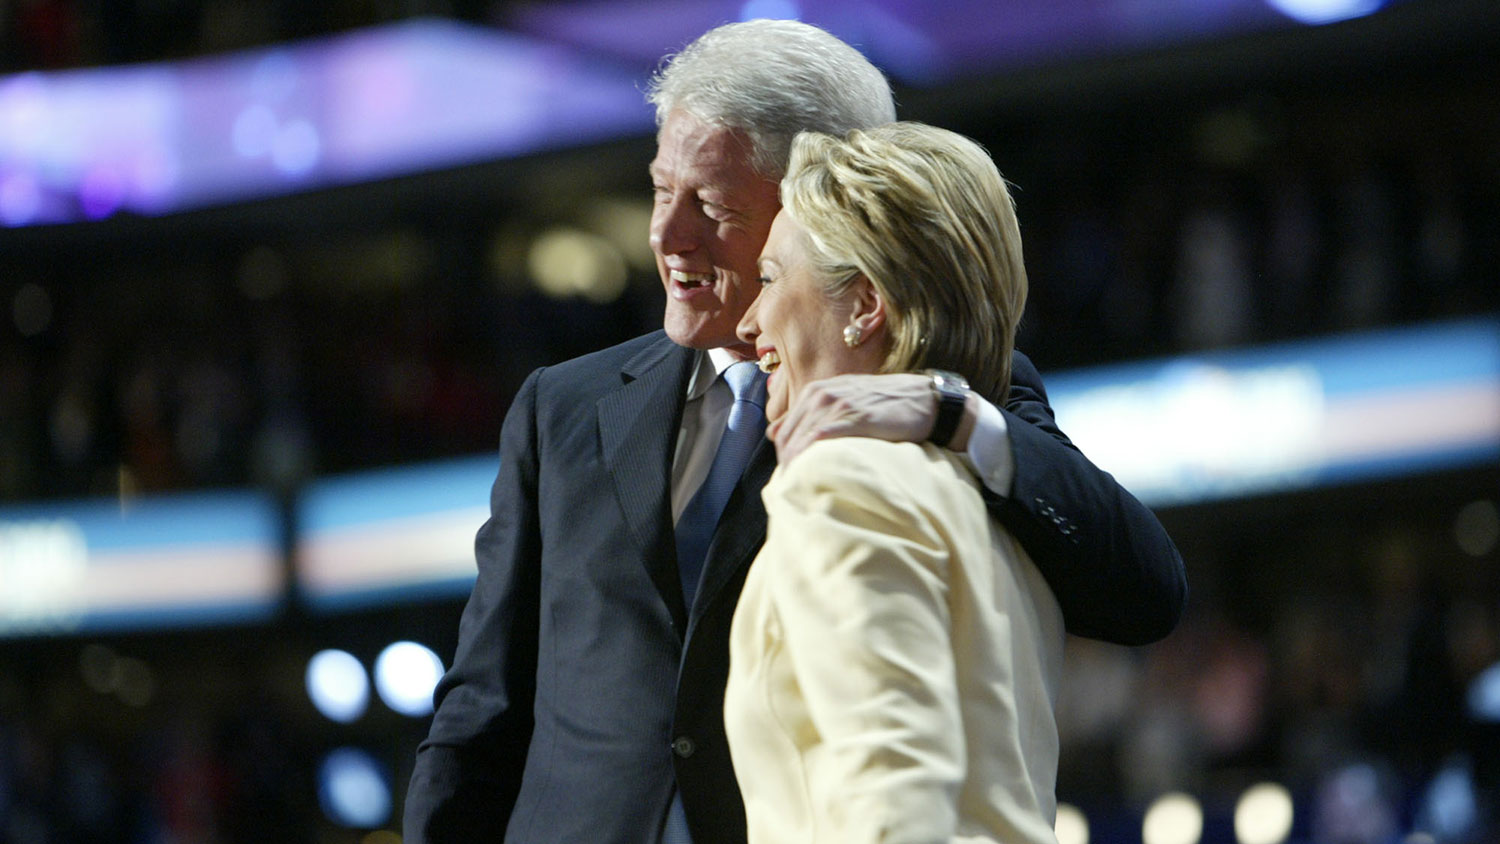 Former President Bill Clinton and Senator Hillary Clinton embrace after the senator introduced her husband to the first session of the Democratic National Convention in Boston Monday July 26, 2004.
